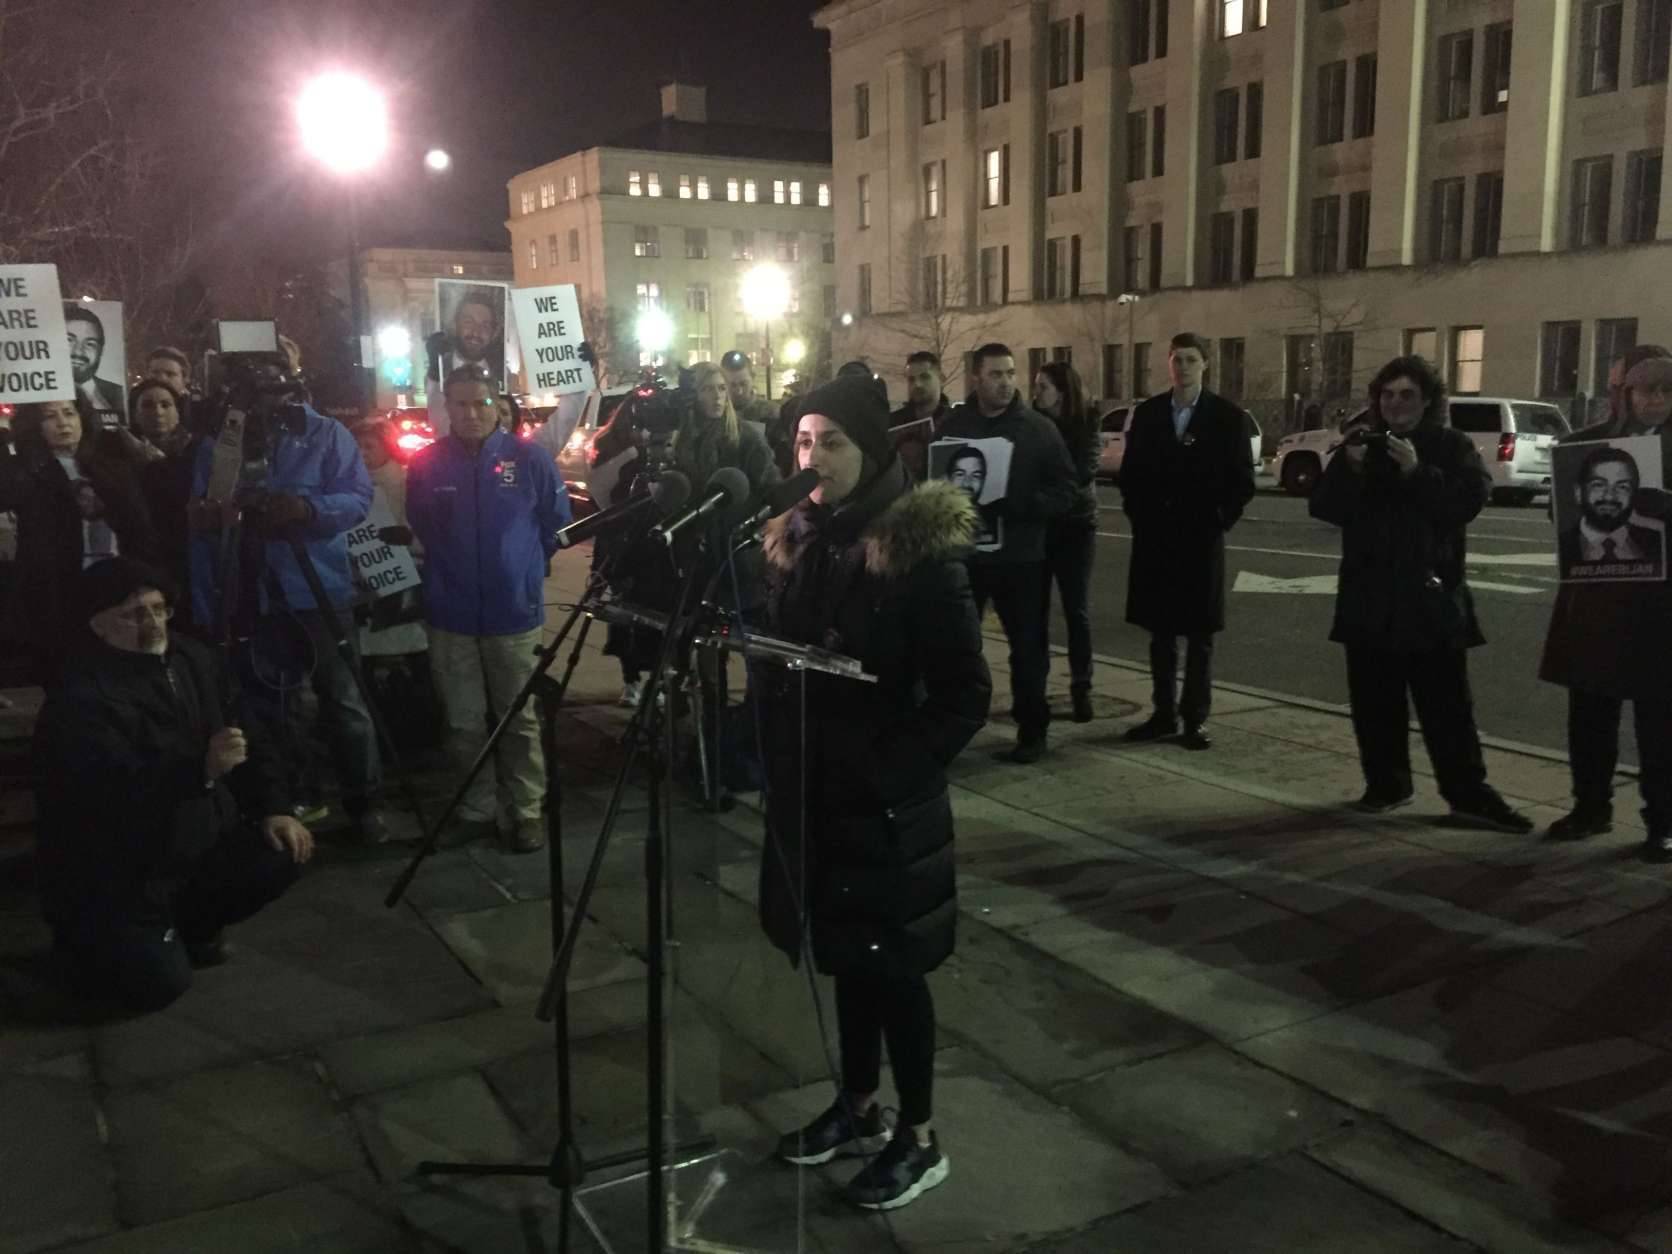 Negeen Ghaisar speaks at a rally held Friday, Jan. 26, 2018, outside of the Department of the Interior in D.C. Supporters demand answers in the U.S. Park Police shooting death of Virginia man Bijan Ghaisar last November. (WTOP/Mike Murillo)